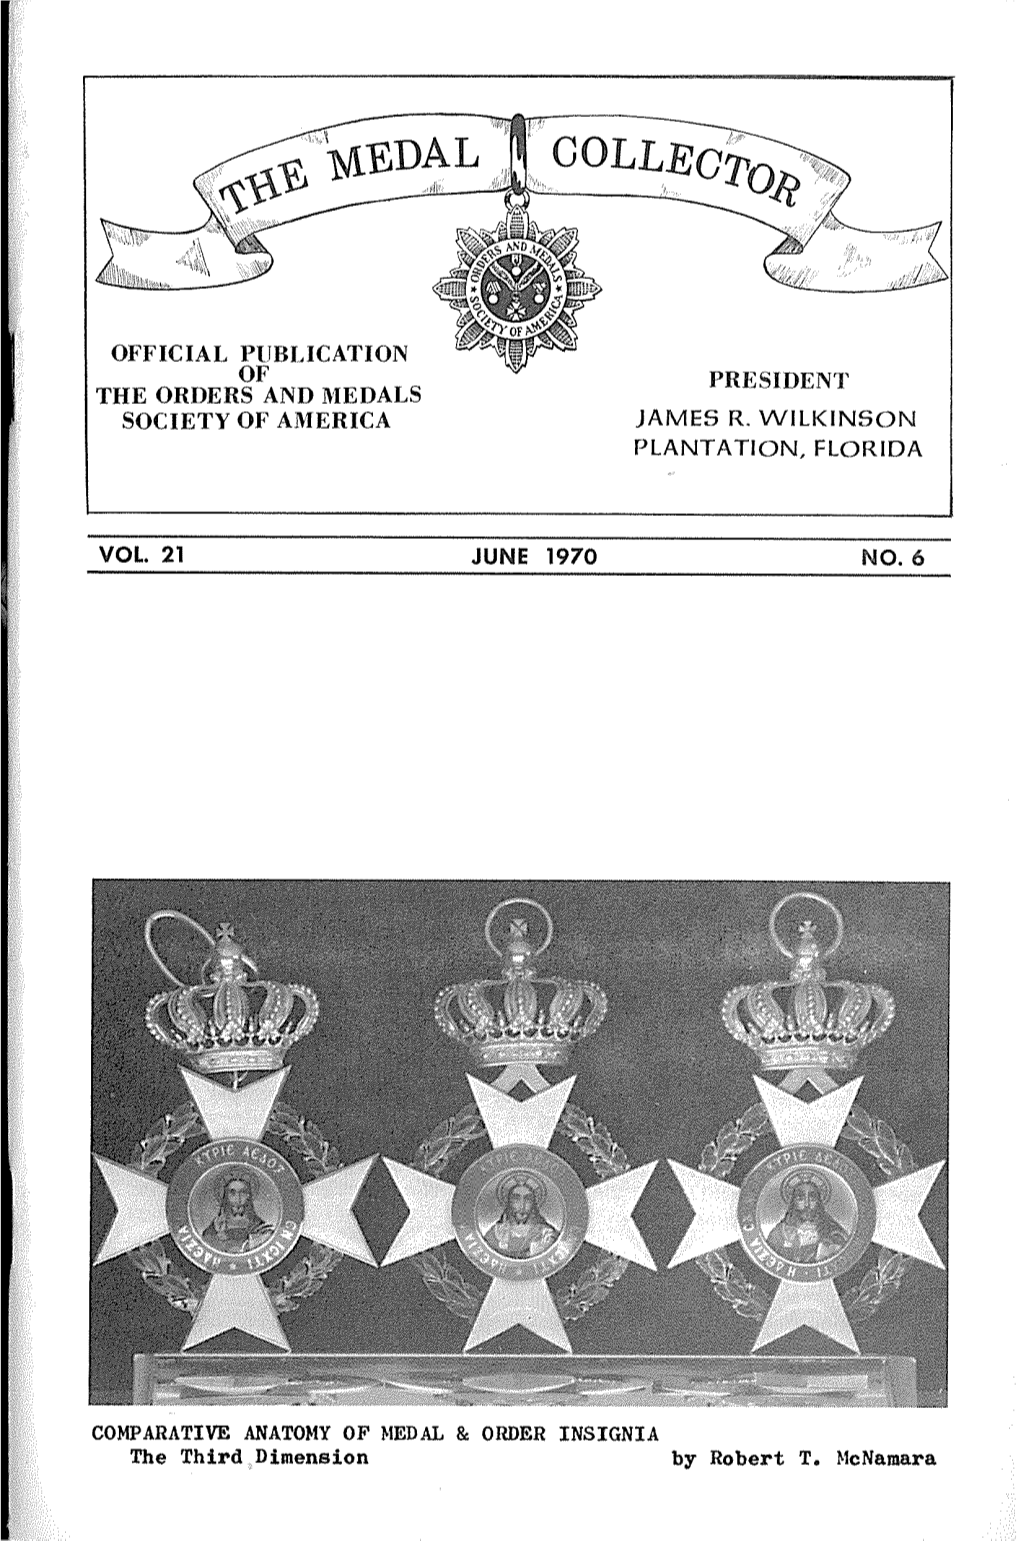 COMPARATIVE ANATOMY of MEDAL & ORDER INSIGNIA The